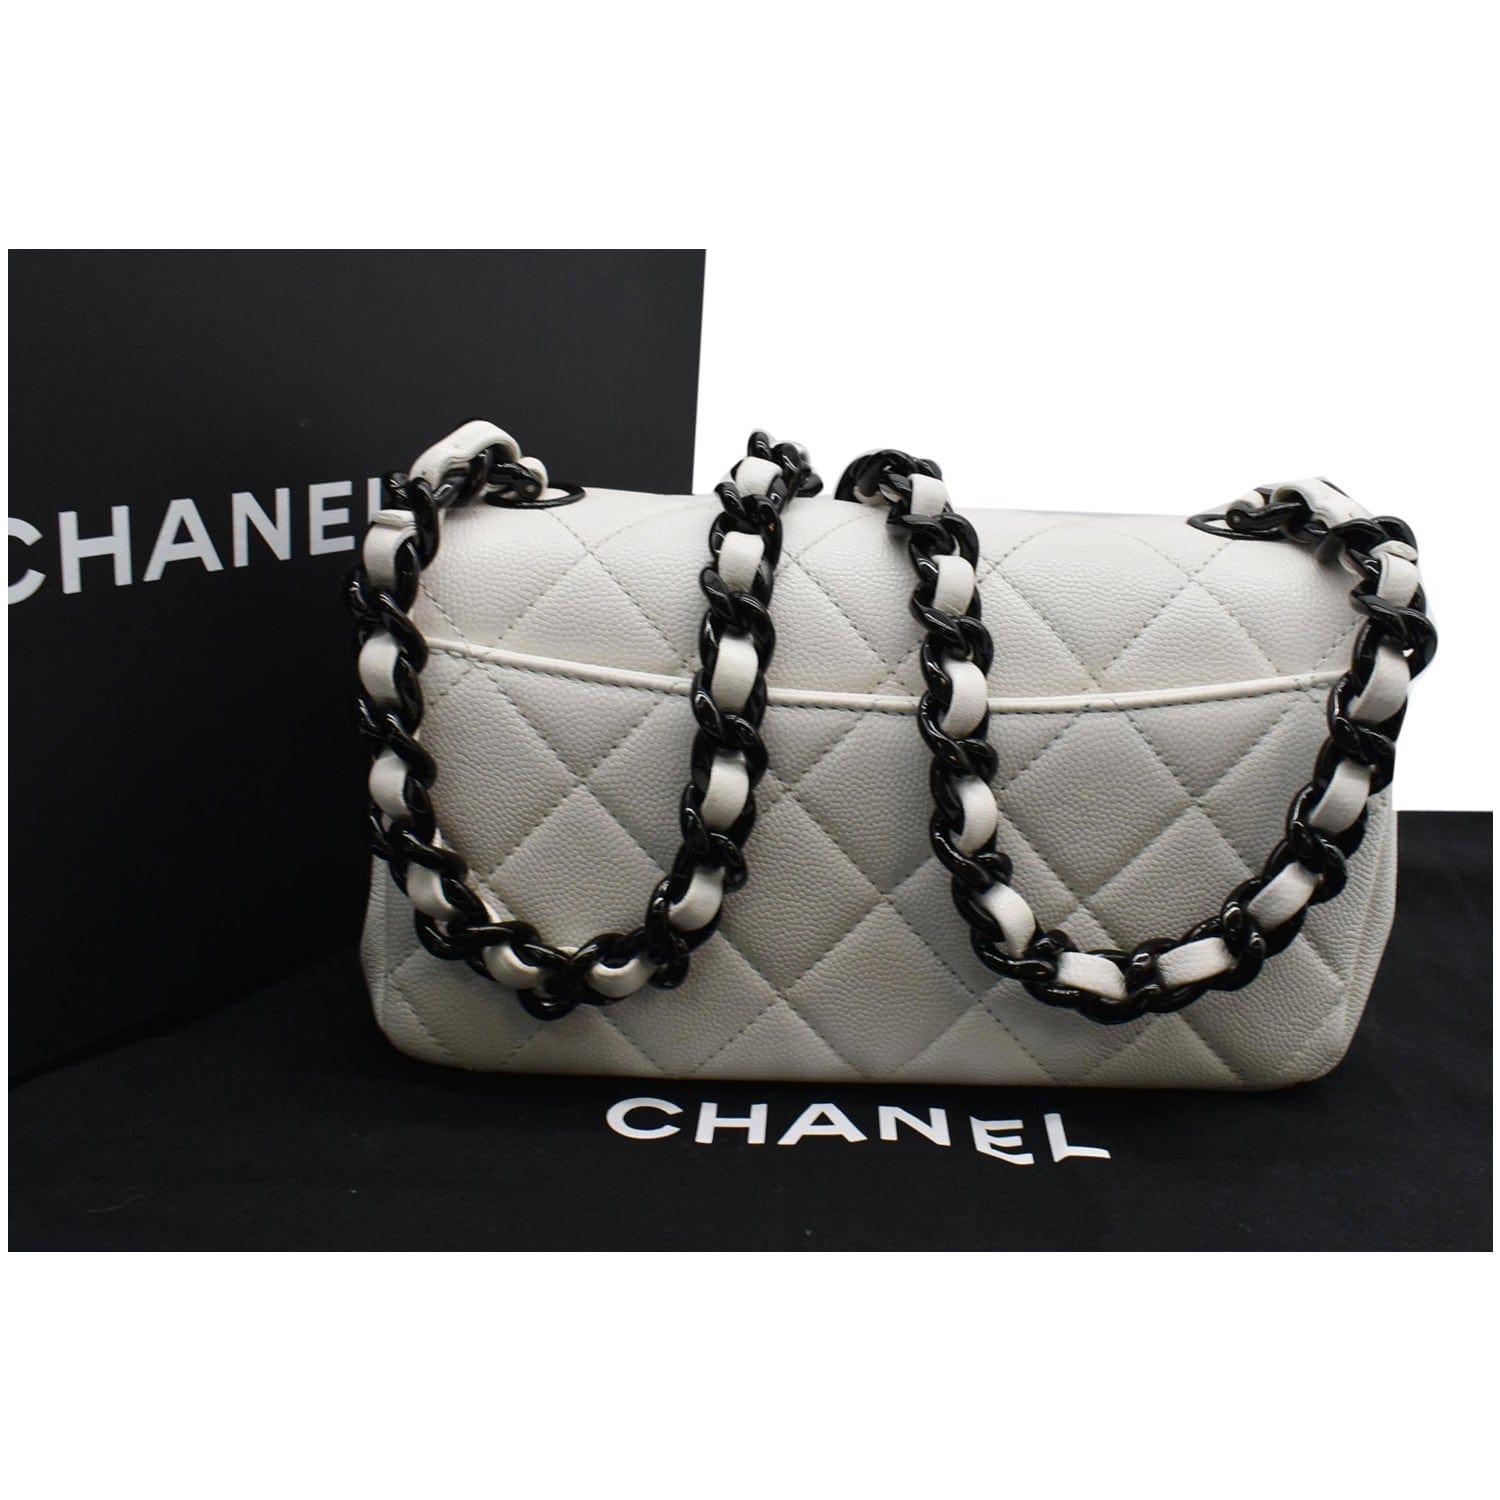 chanel medium flap bag outfit